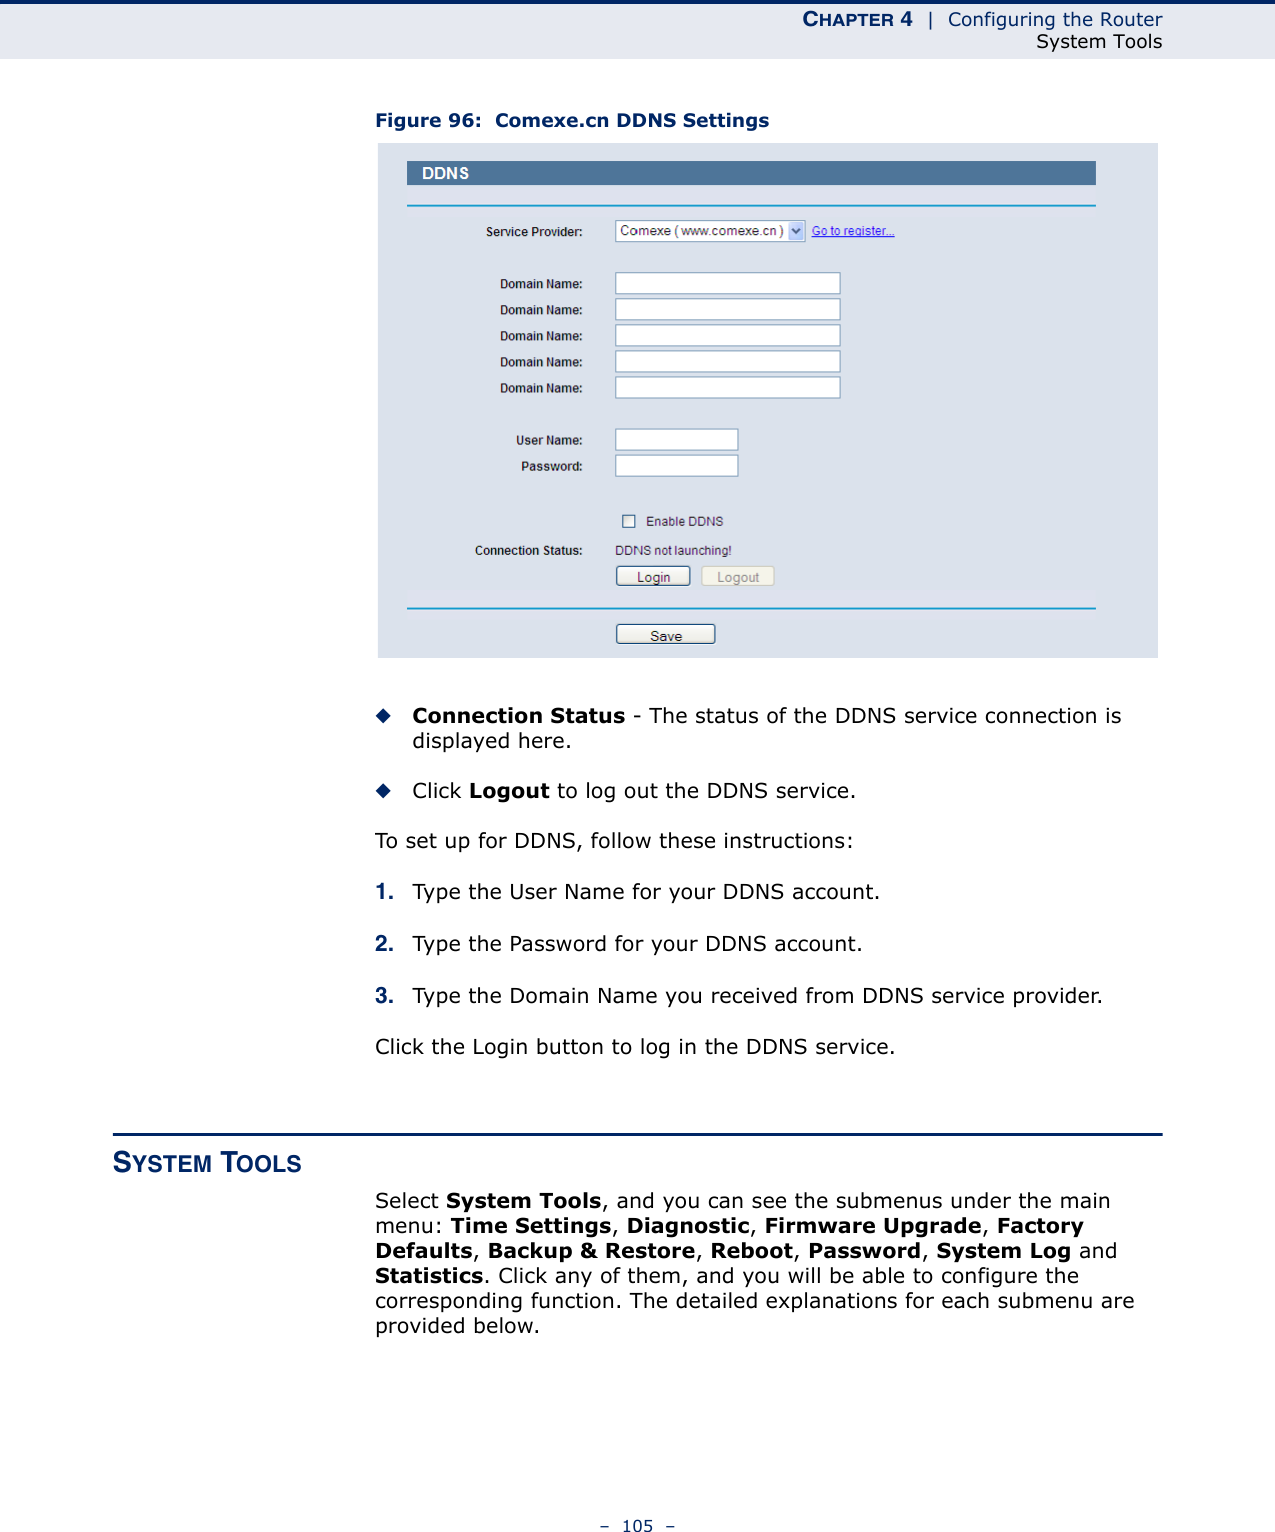 CHAPTER 4  |  Configuring the RouterSystem Tools–  105  –Figure 96:  Comexe.cn DDNS Settings◆Connection Status - The status of the DDNS service connection is displayed here.◆Click Logout to log out the DDNS service.To set up for DDNS, follow these instructions:1. Type the User Name for your DDNS account. 2. Type the Password for your DDNS account. 3. Type the Domain Name you received from DDNS service provider.Click the Login button to log in the DDNS service.SYSTEM TOOLSSelect System Tools, and you can see the submenus under the main menu: Time Settings, Diagnostic, Firmware Upgrade, Factory Defaults, Backup &amp; Restore, Reboot, Password, System Log and Statistics. Click any of them, and you will be able to configure the corresponding function. The detailed explanations for each submenu are provided below.